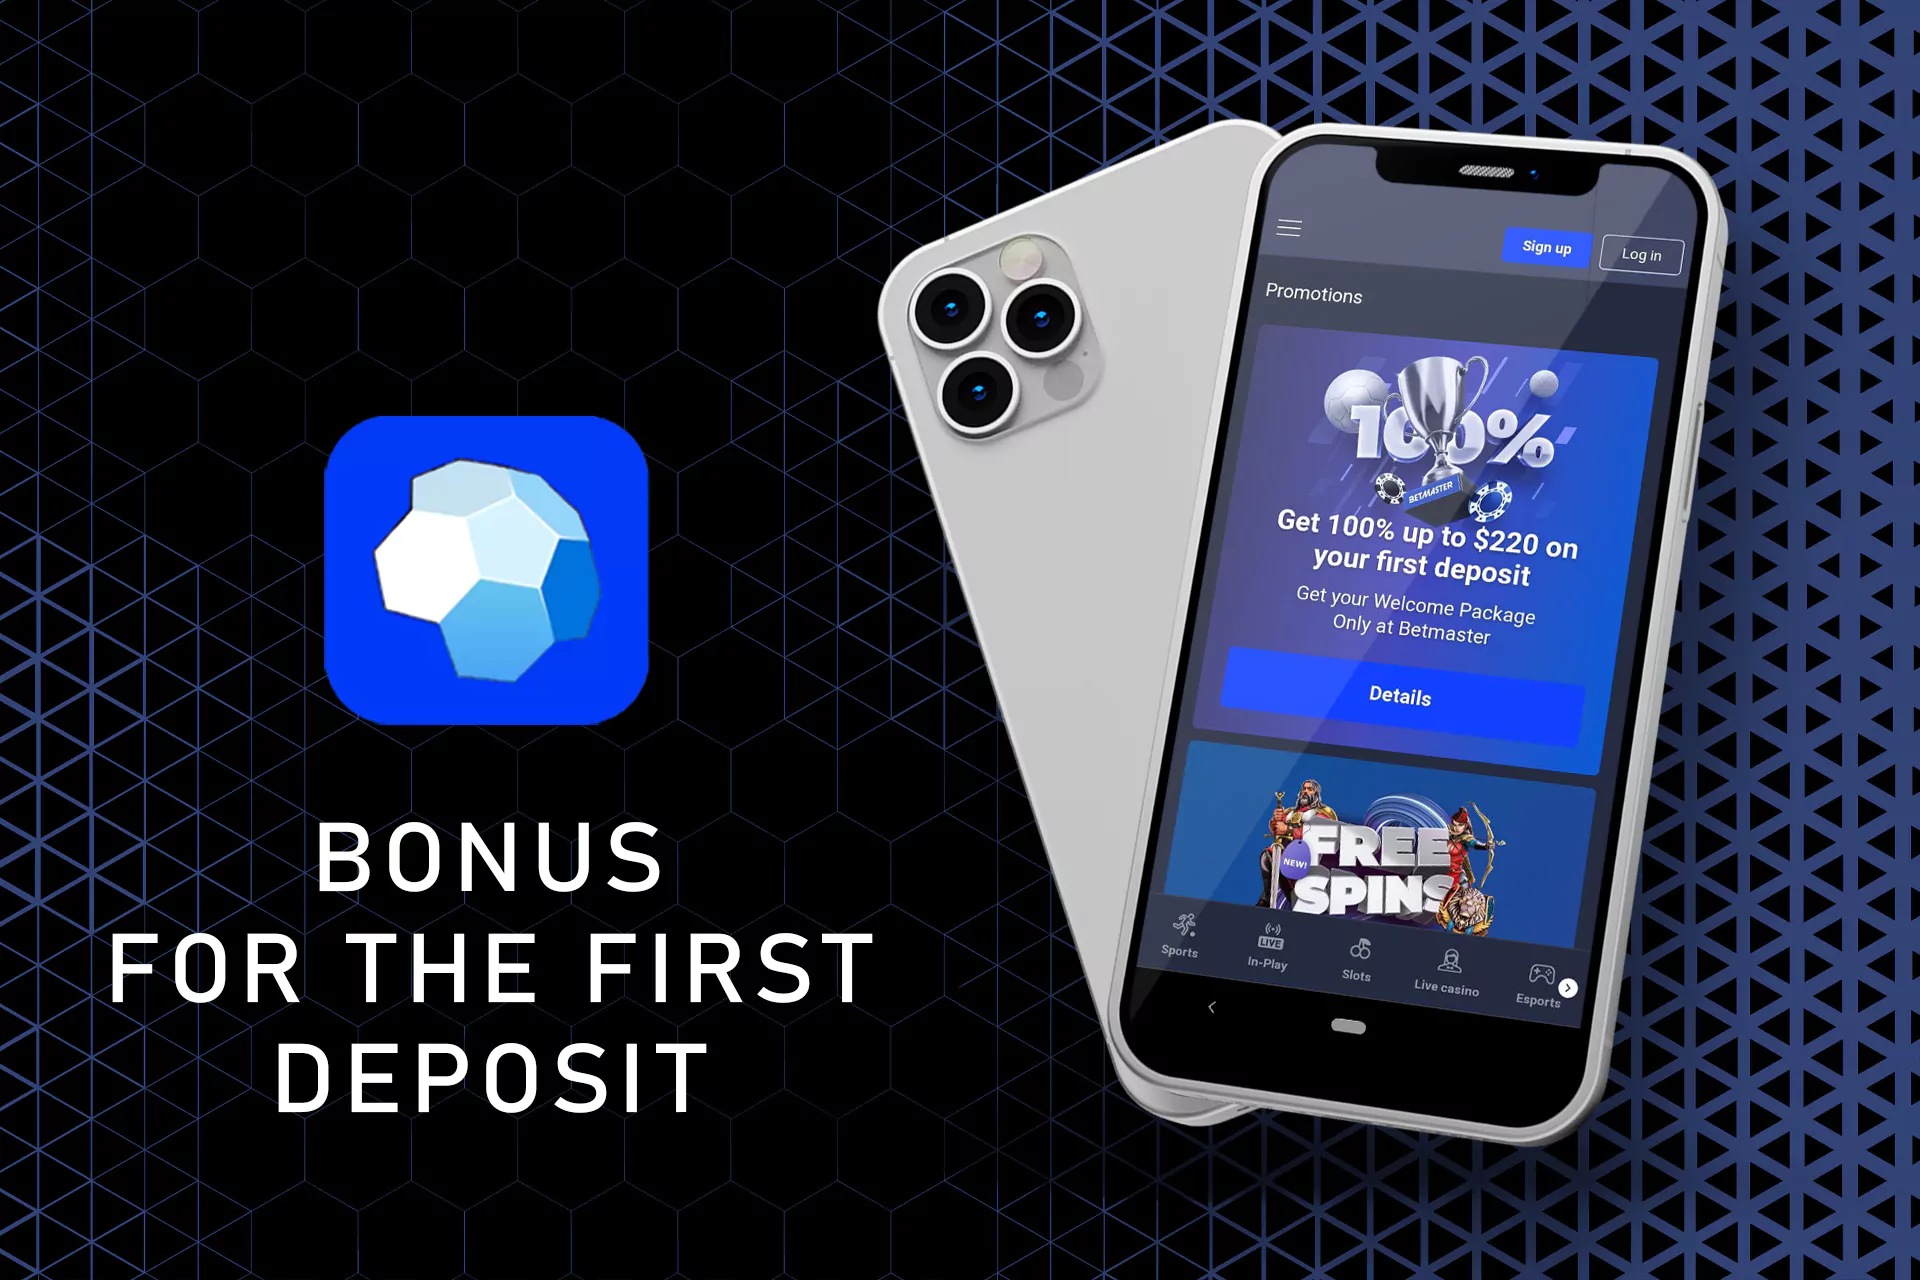 Top up your betting account to get the first deposit welcome bonus from the bookmaker.